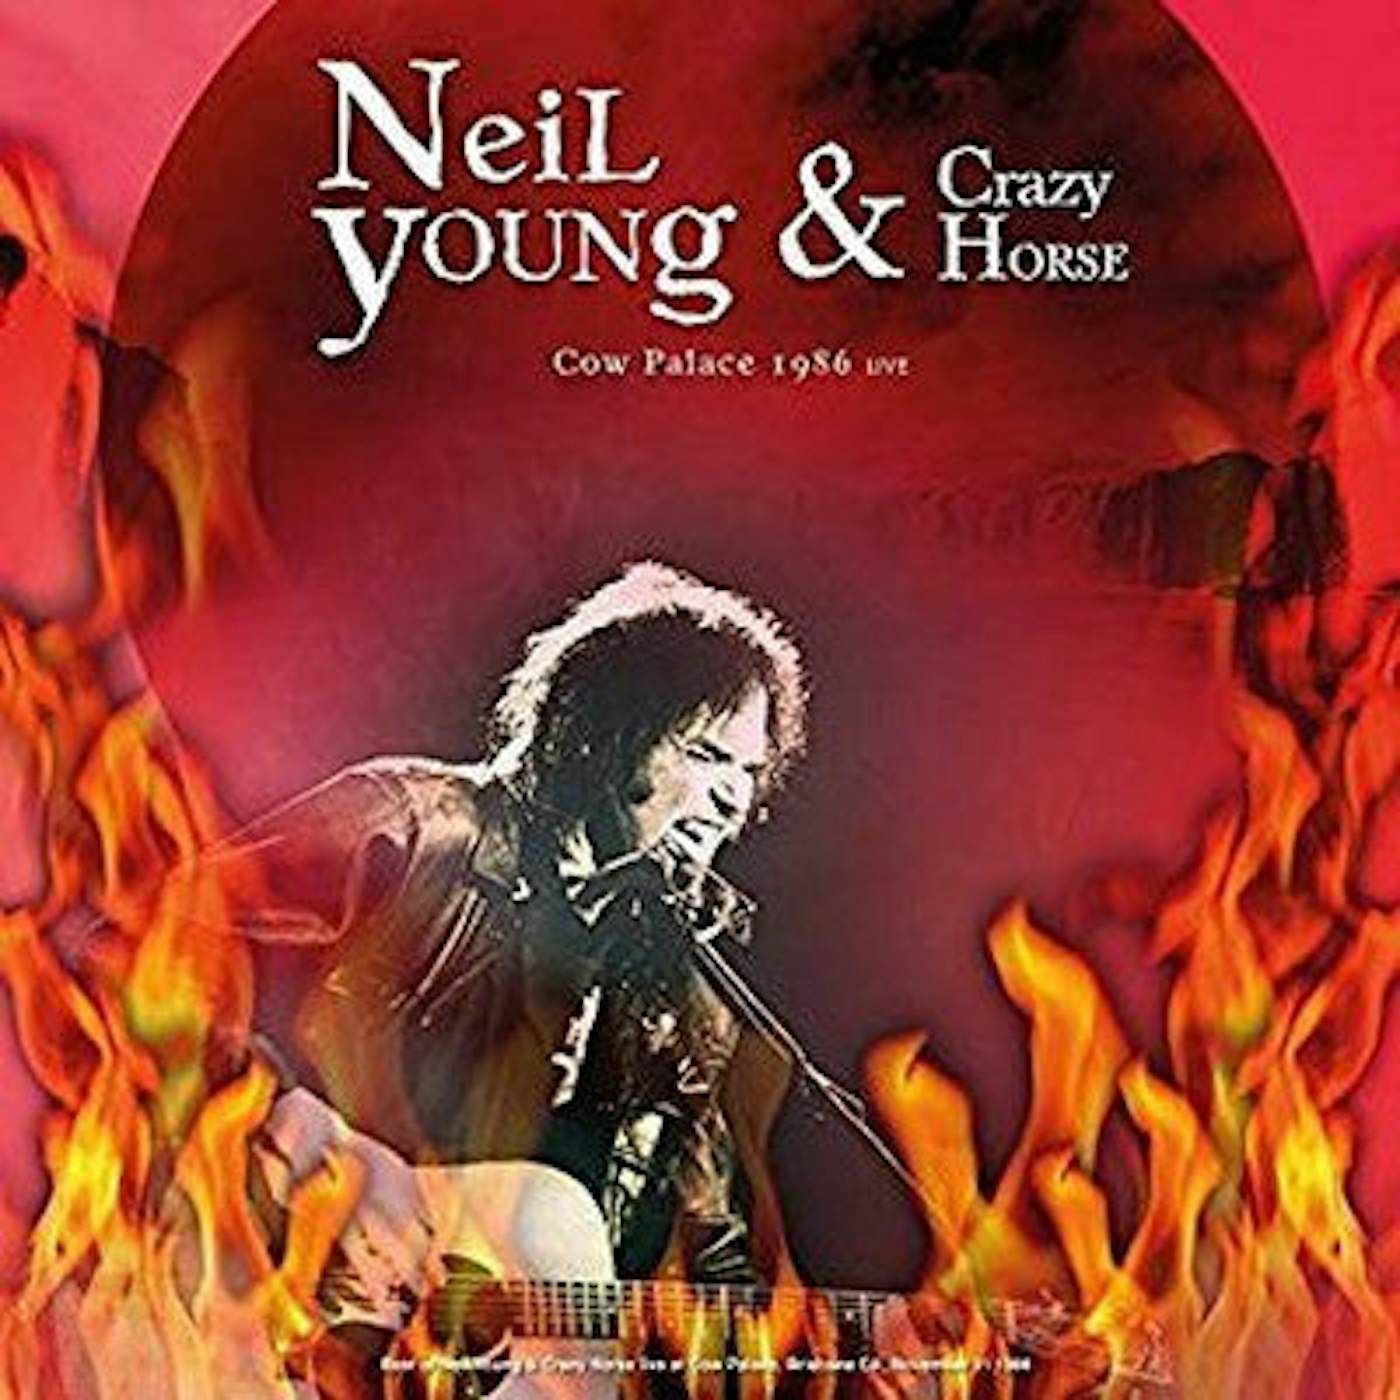 Neil Young & Crazy Horse LP Vinyl Record - Best Of Cow Palace 19 86 Live